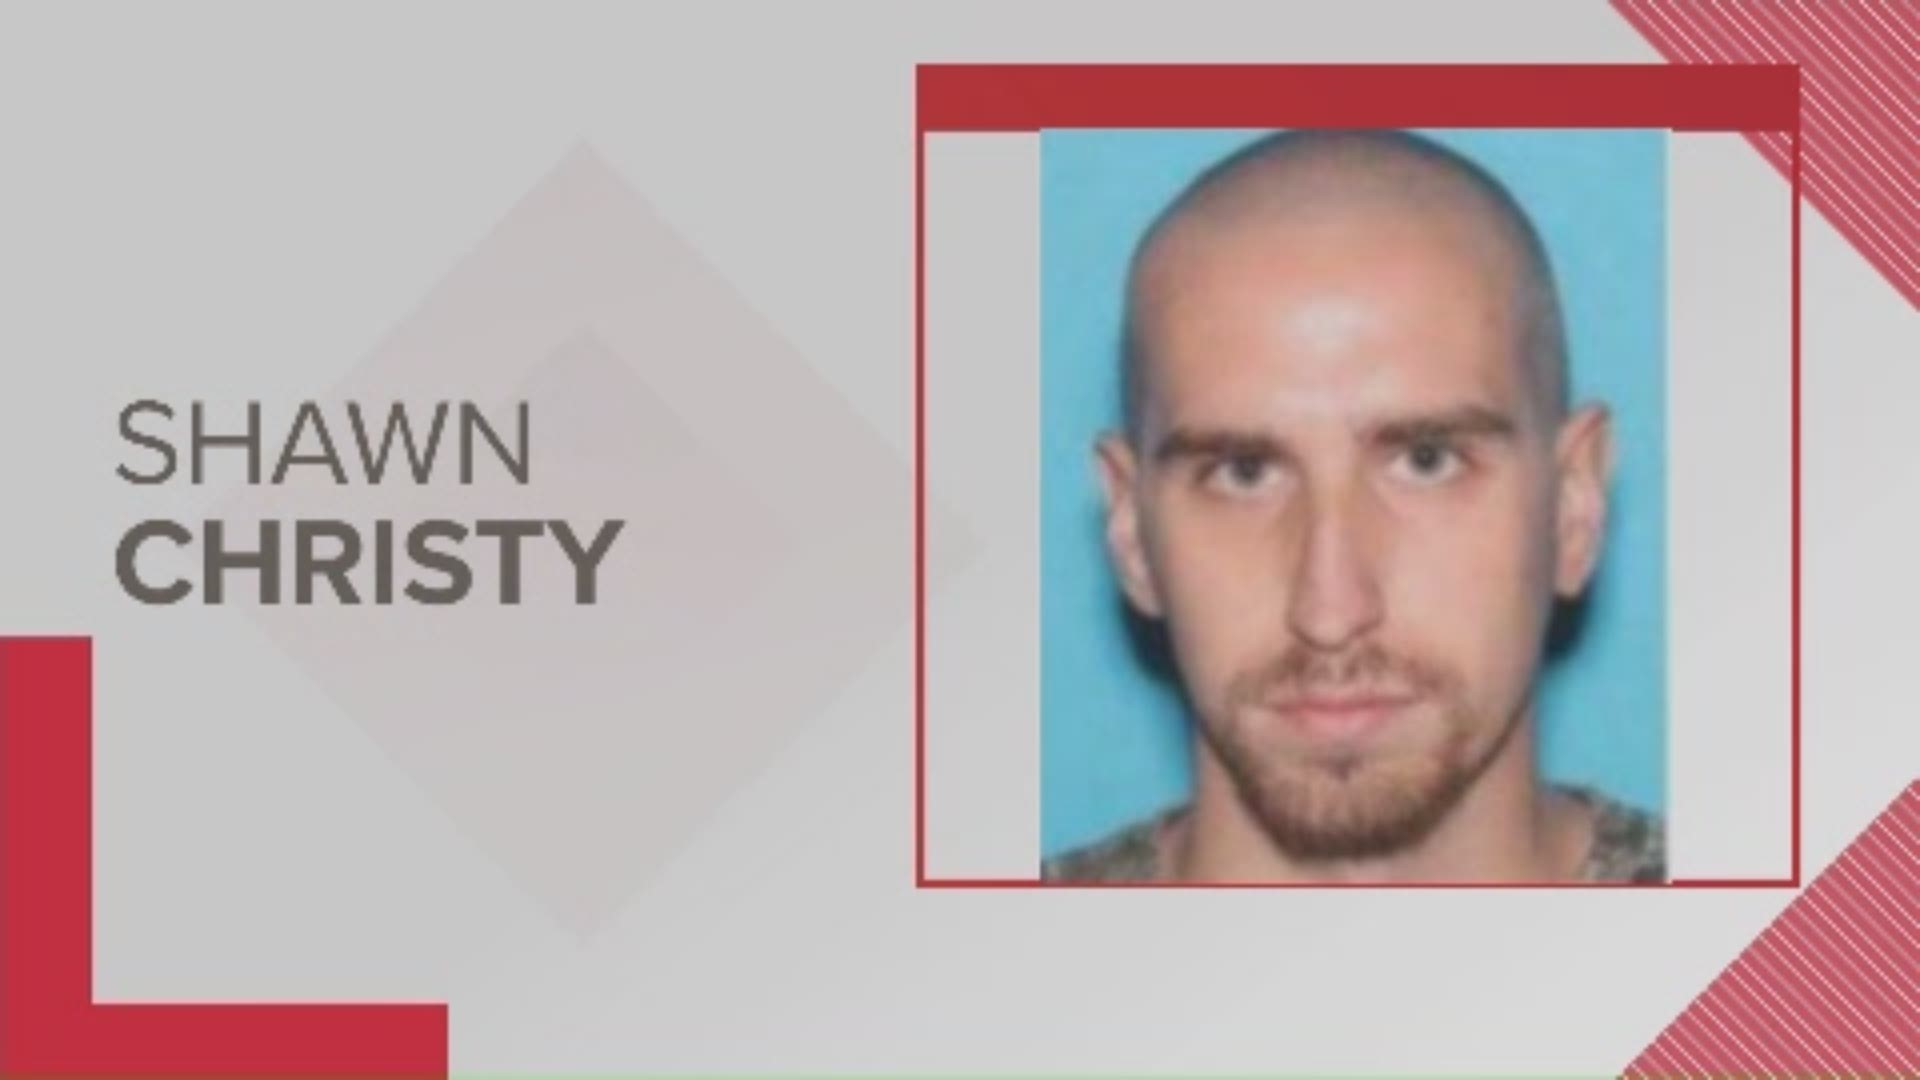 The FBI and U.S. Marshals are searching for a man who made threats to shoot President Donald Trump. They believe he may be in the Adair County area.